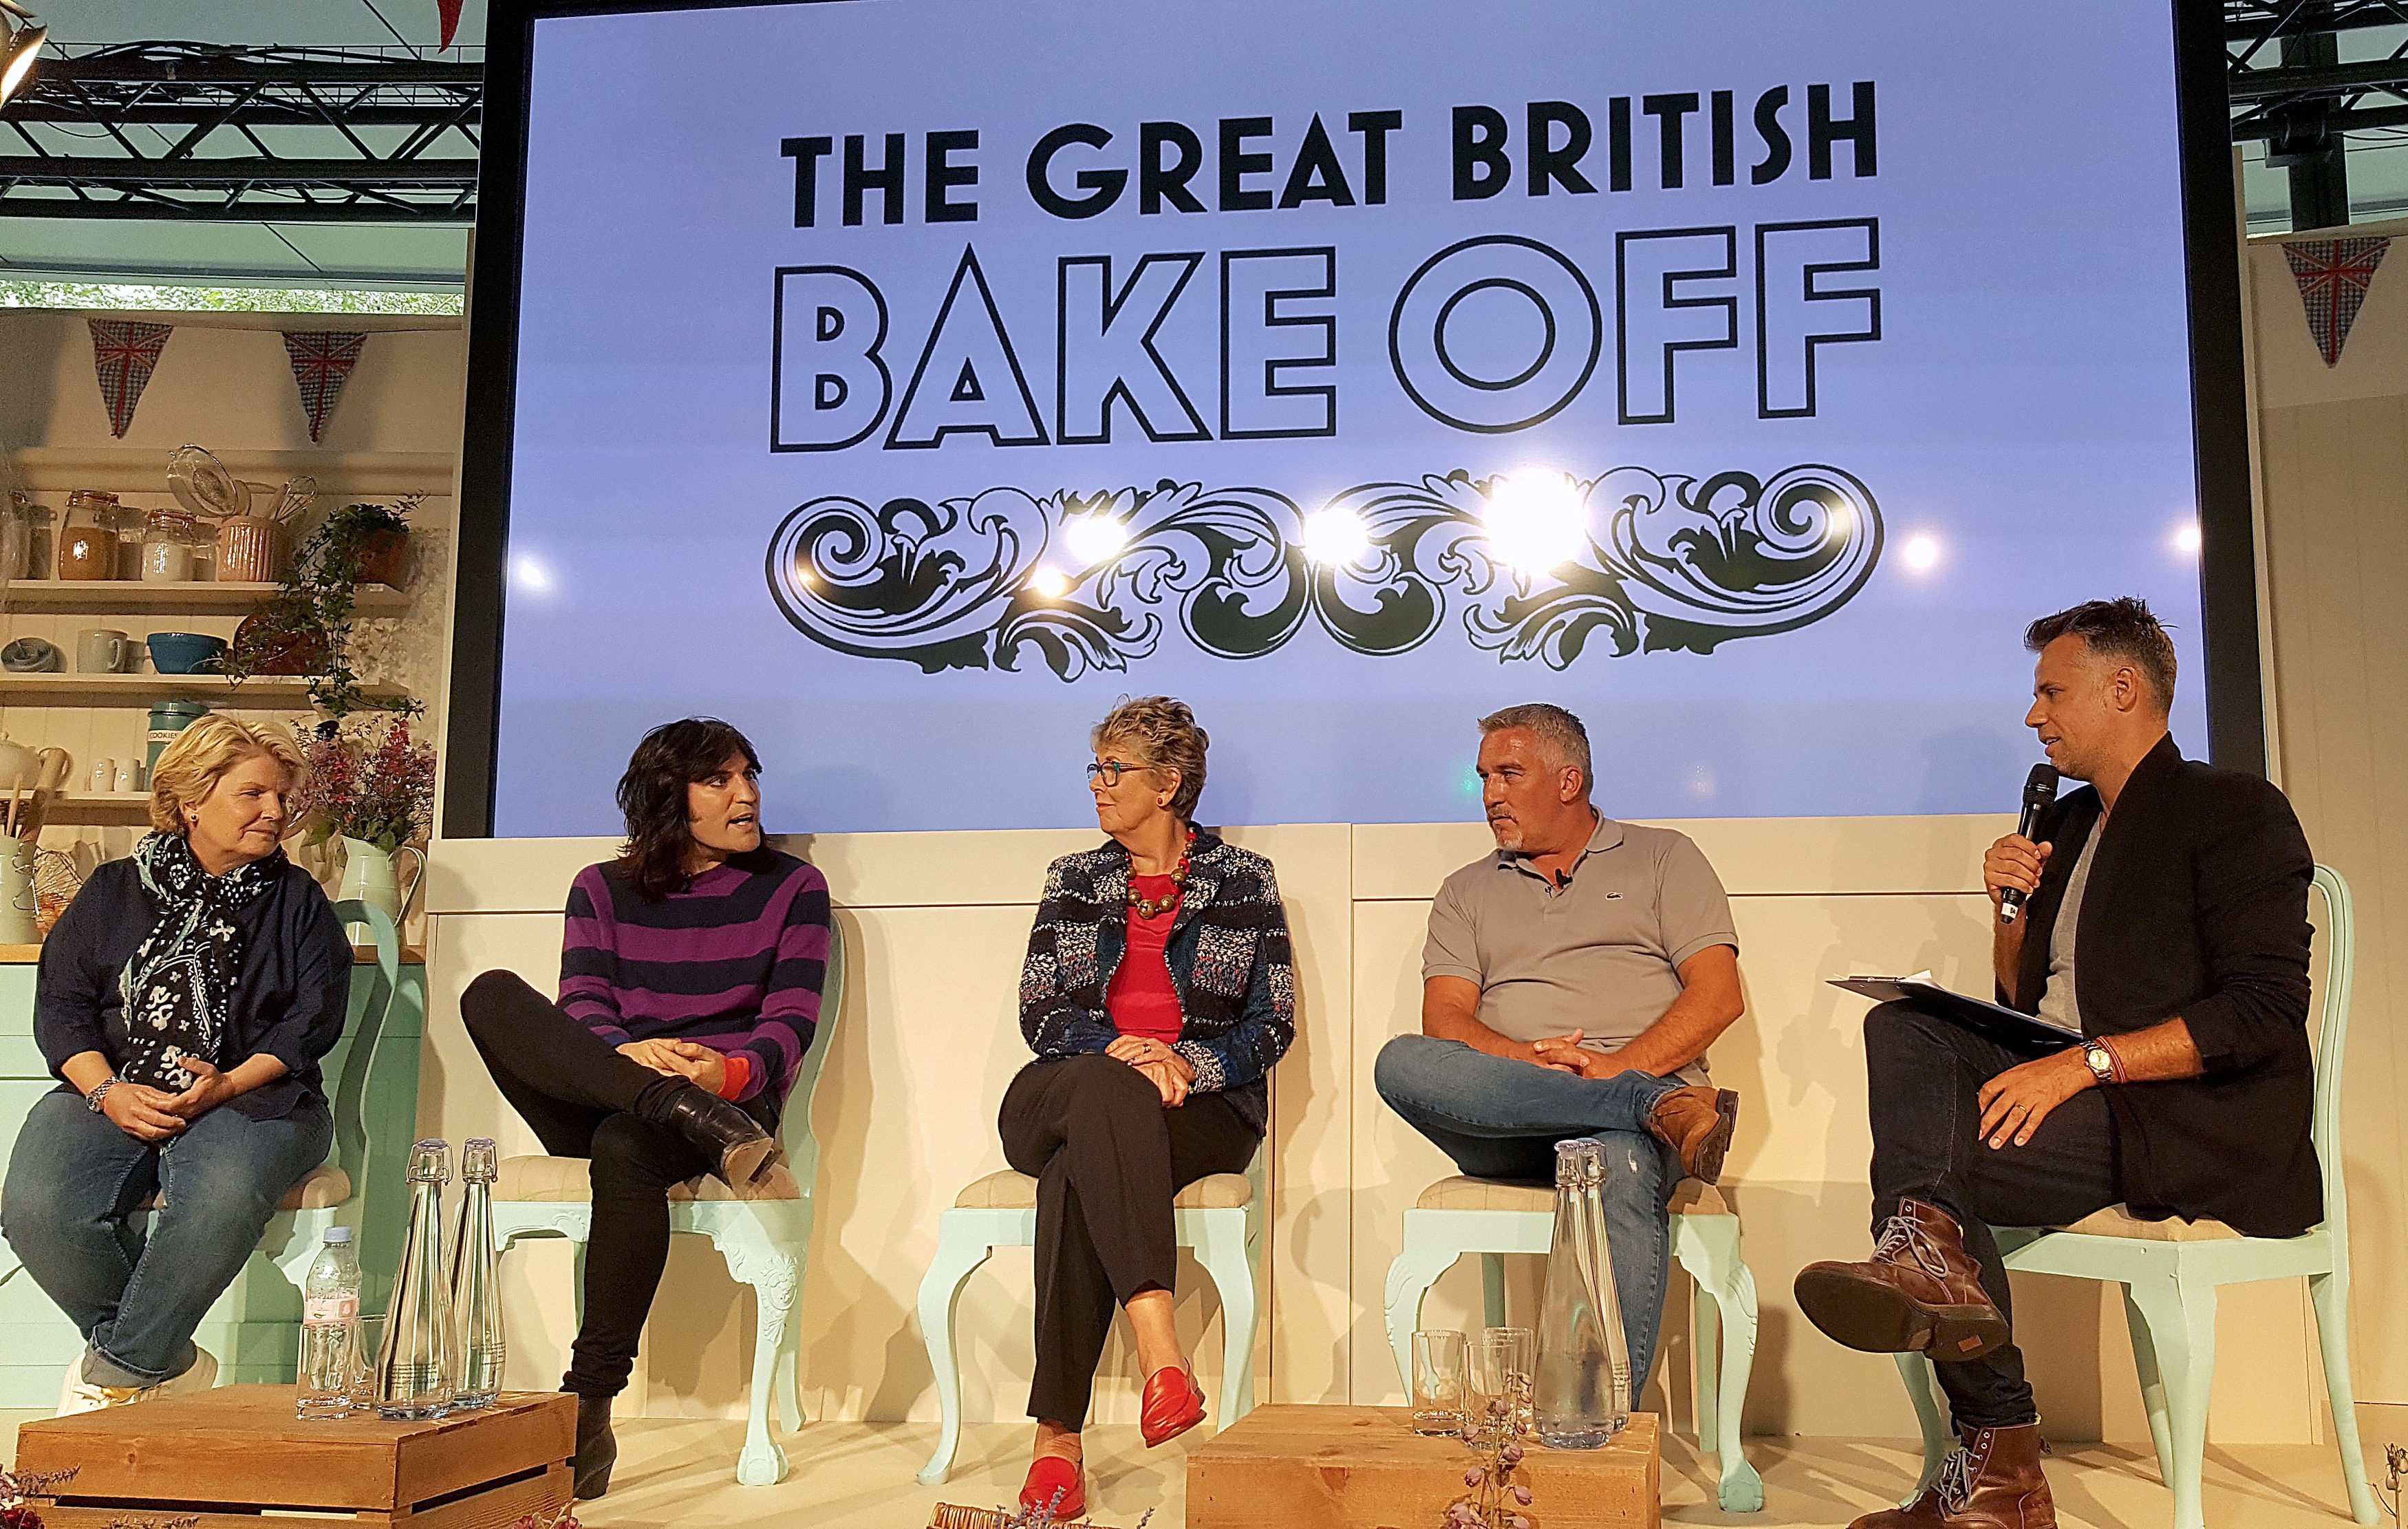 Richard Bacon (right) with judges and presenters for The Great British Bake Off (left to right) Sandi Toksvig, Noel Fielding, Prue Leith and Paul Hollywood at Channel 4 studios in central London. (Francesca Gosling/PA) 